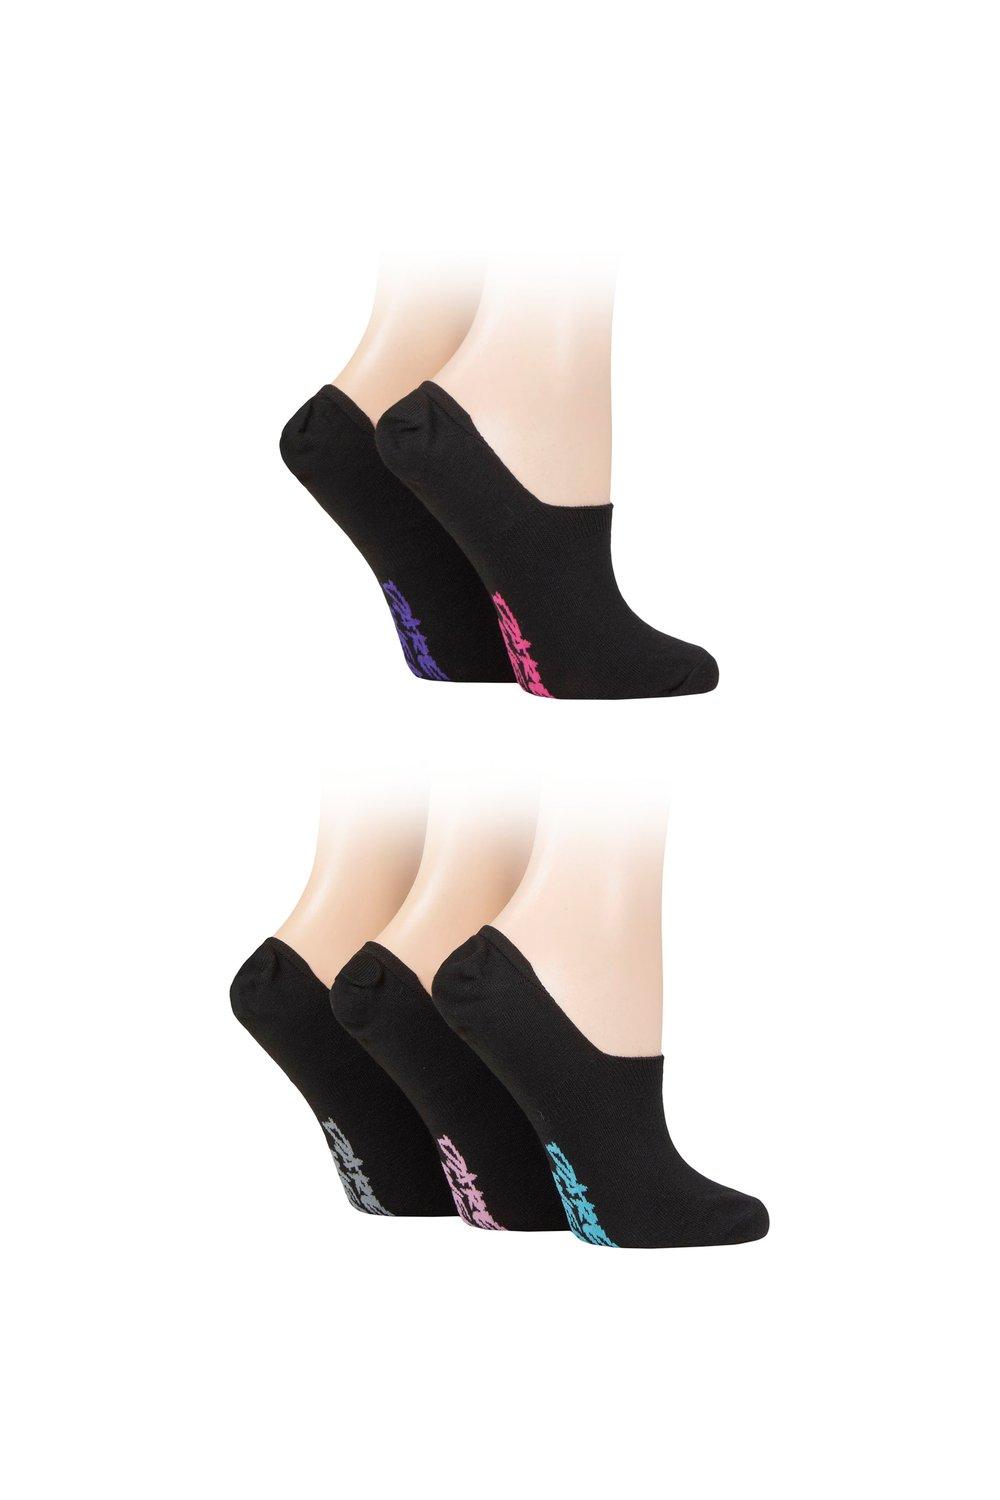 5 Pair Dare to Wear No Show Socks